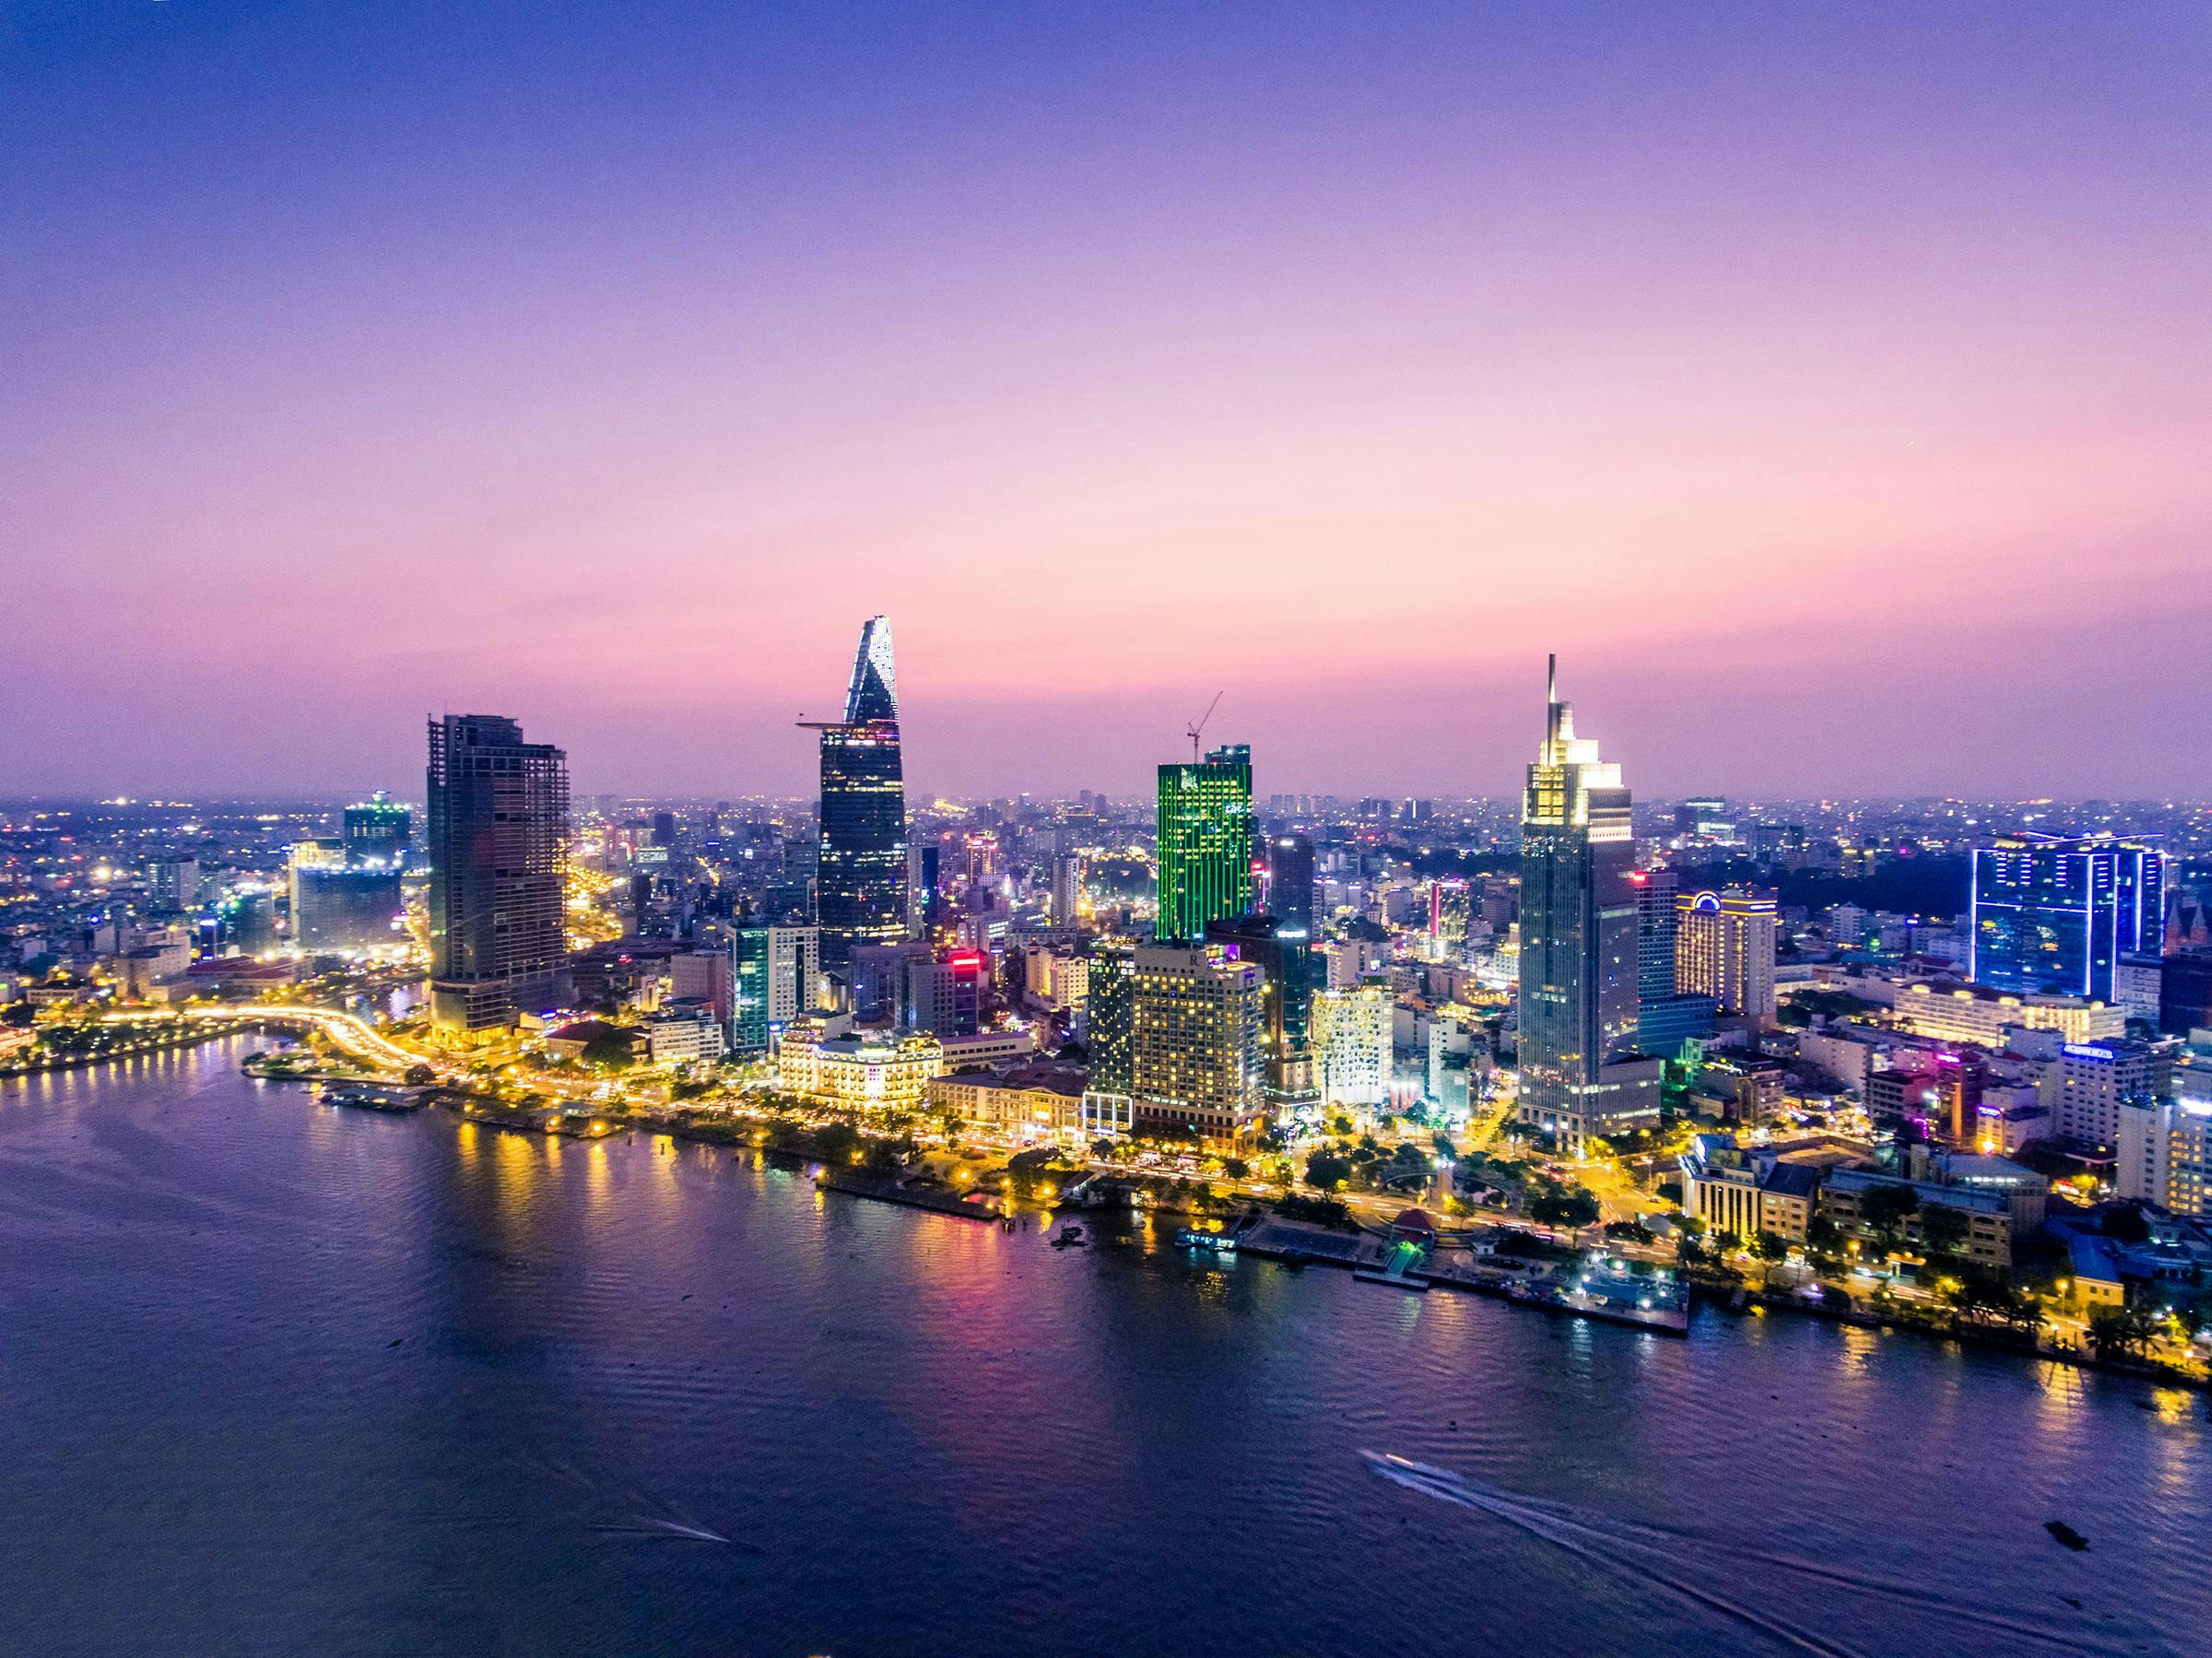 symbol,city,exterior,ho,panoramic,ben,skyline,bitexco,quach,building,saigon,speed,view,modern,car,road,street,landmark,day,park,architecture,tower,traffic,famous,business,orient,chi,metropolis,minh,old,asia,night,asian,indochina,vietcombank,vietnam,downtown,vietnamese,outdoor,fast,urban,light,culture,river,evening,travel,colorful,unseen architecture building cityscape urban city metropolis water waterfront outdoors